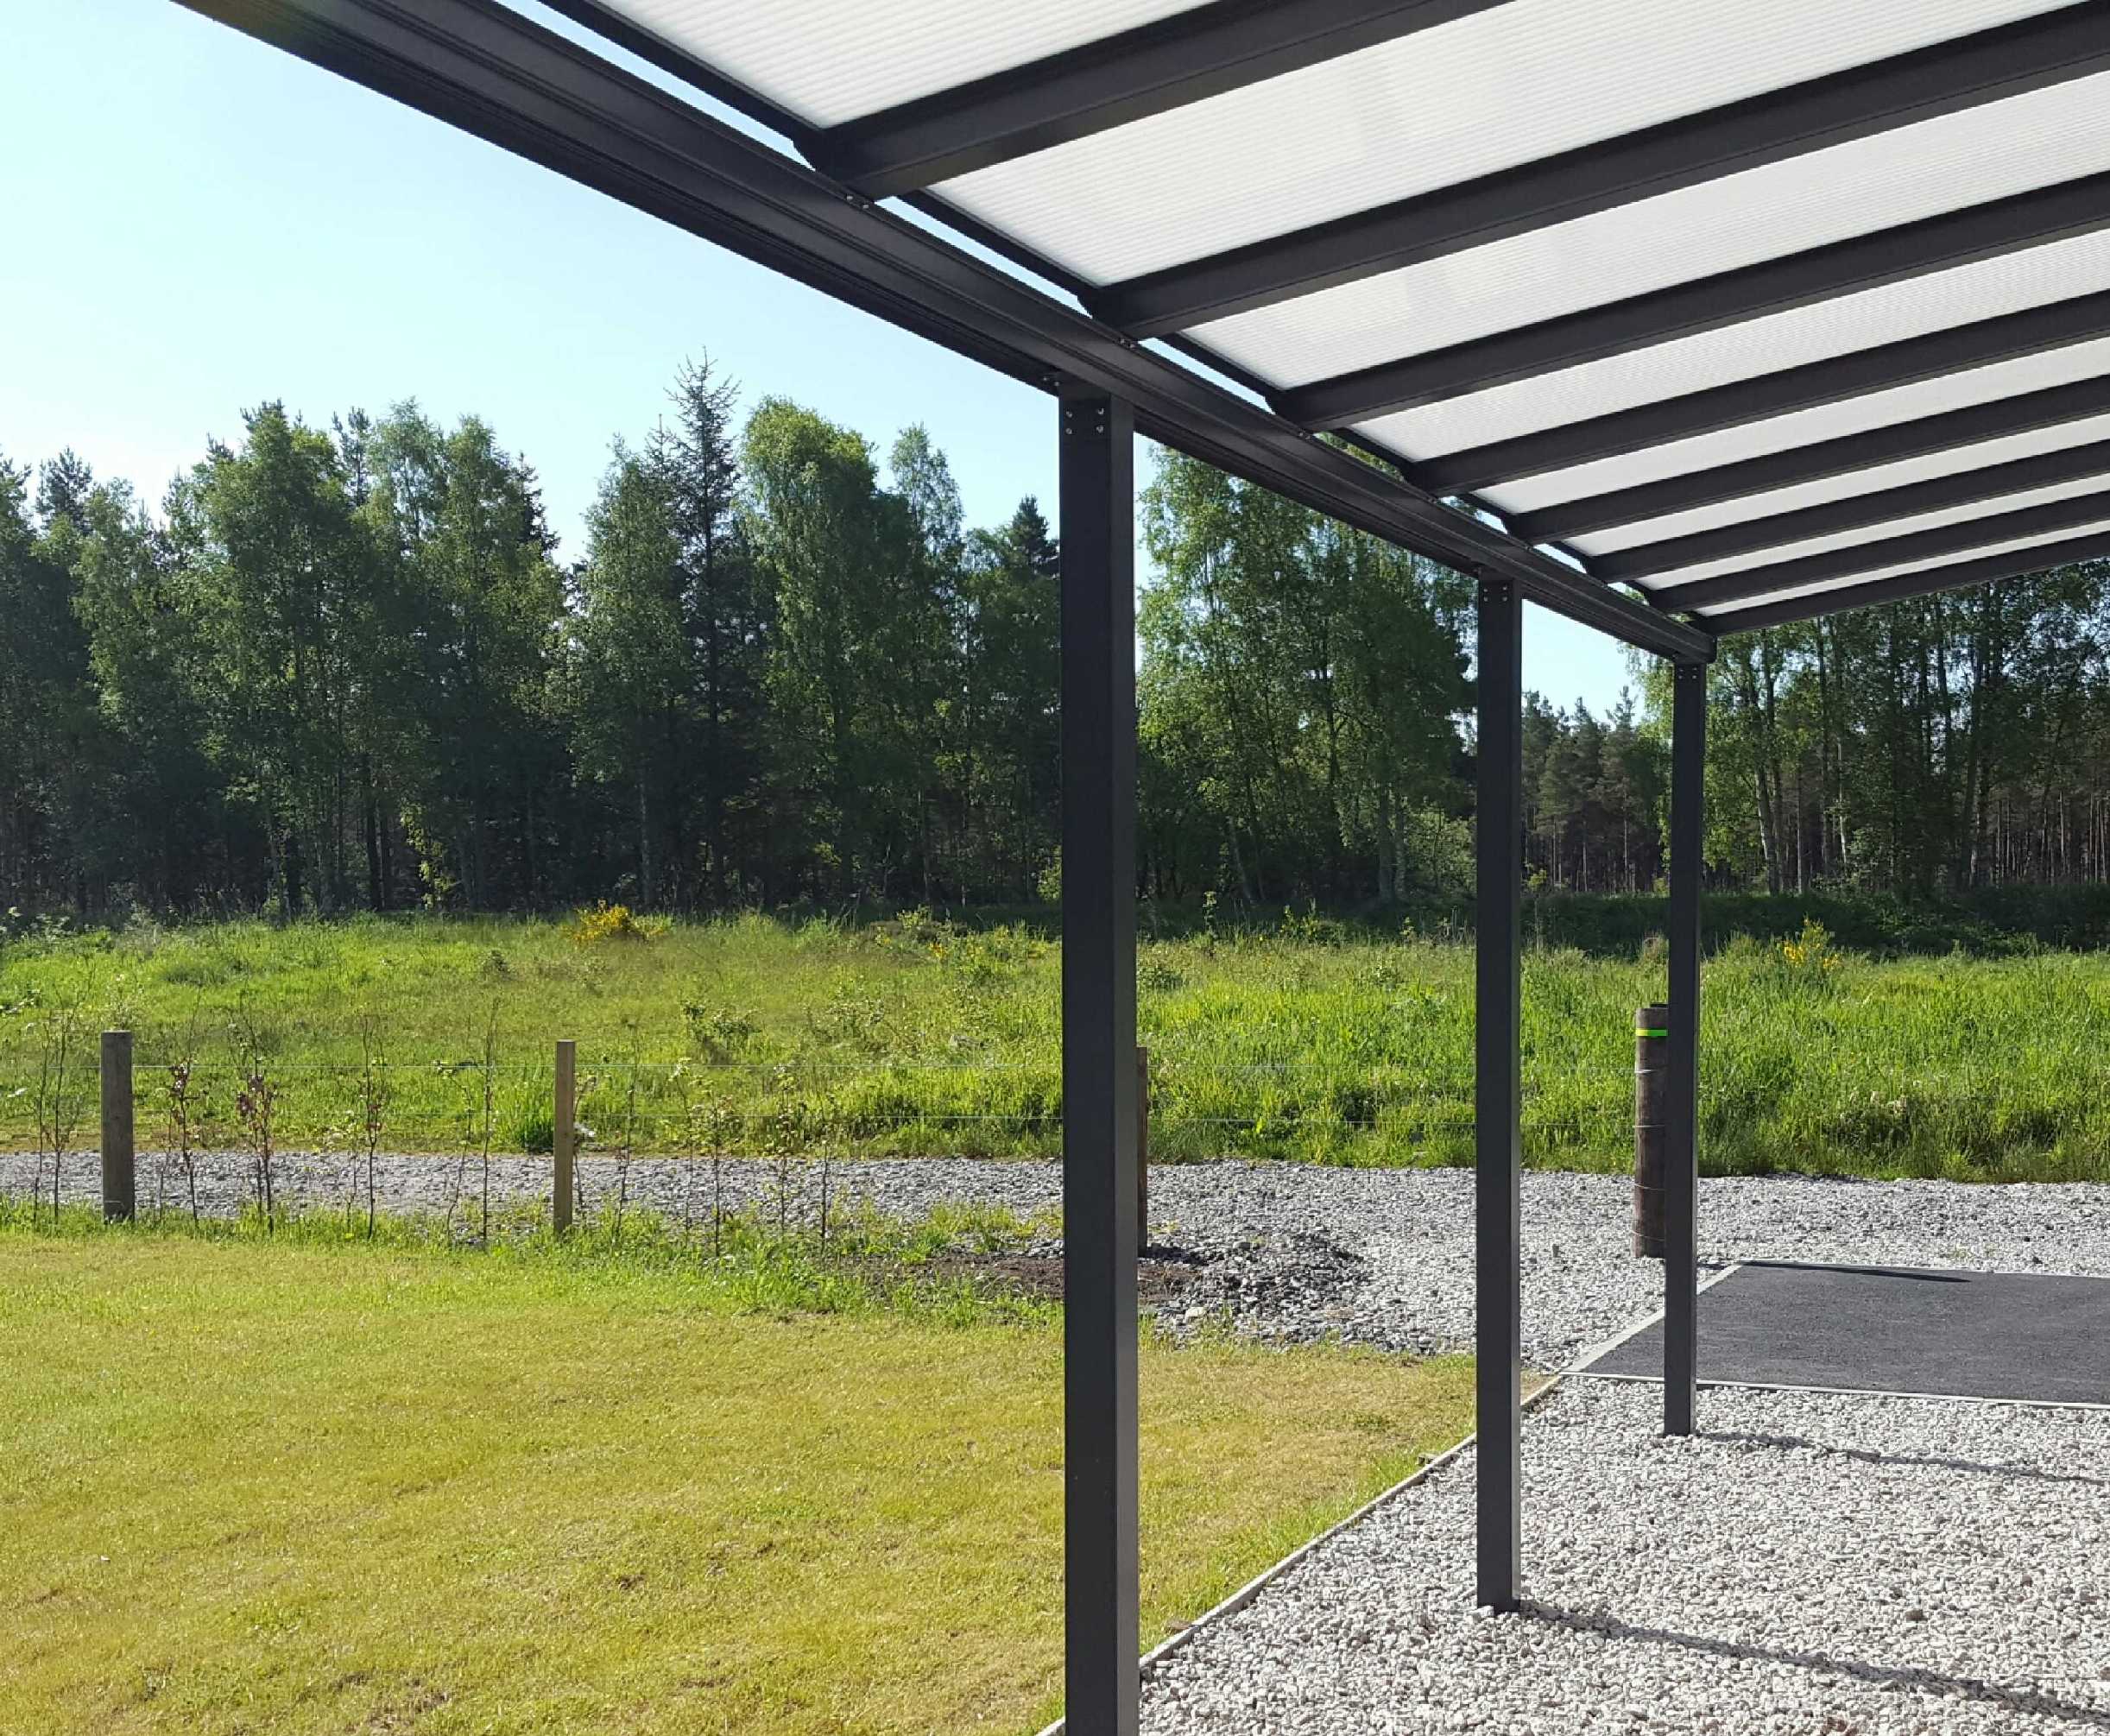 Omega Smart Lean-To Canopy, Anthracite Grey, 6mm Glass Clear Plate Polycarbonate Glazing - 9.4m (W) x 4.0m (P), (5) Supporting Posts